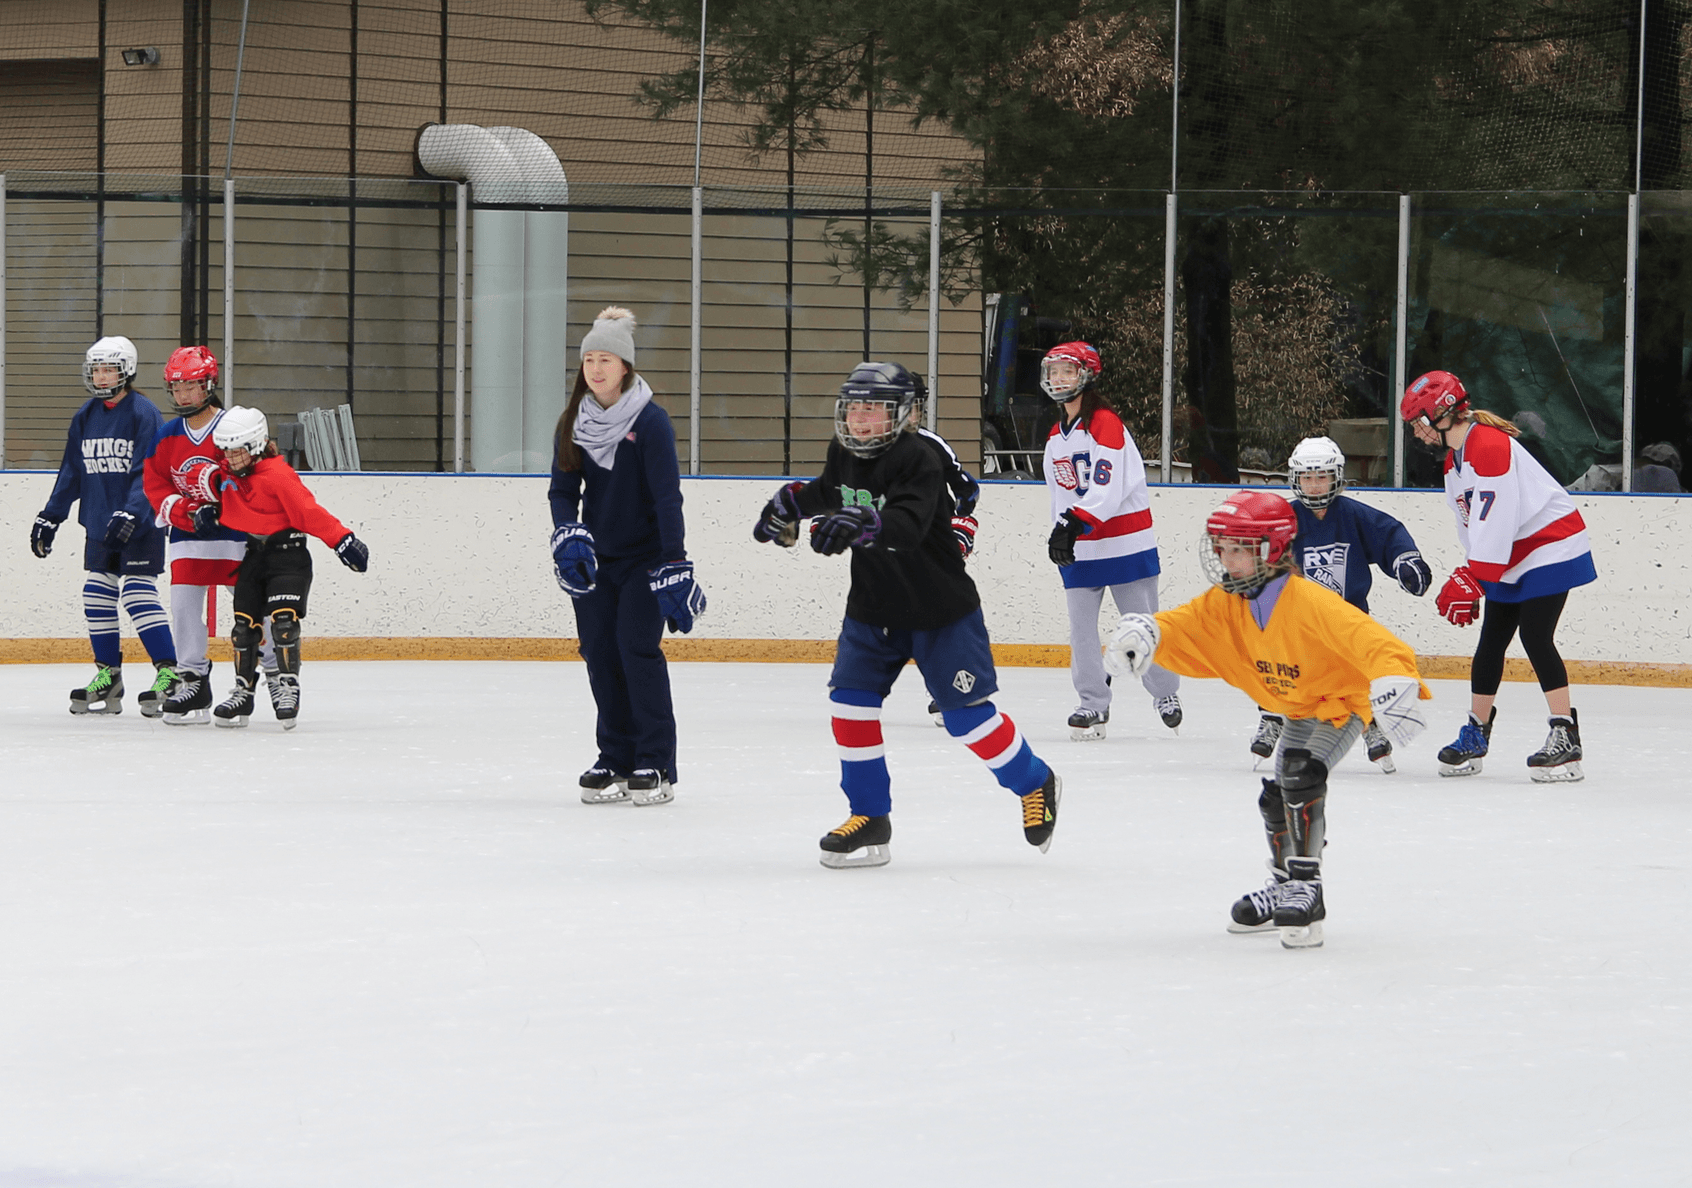 Girls in grades 3, 4, and 5 played Red Light/Green Light at Greenwich Skating Club, just one of the fun games to expose girls to ice hockey. Fe 24, 2018 Photo: Leslie Yager